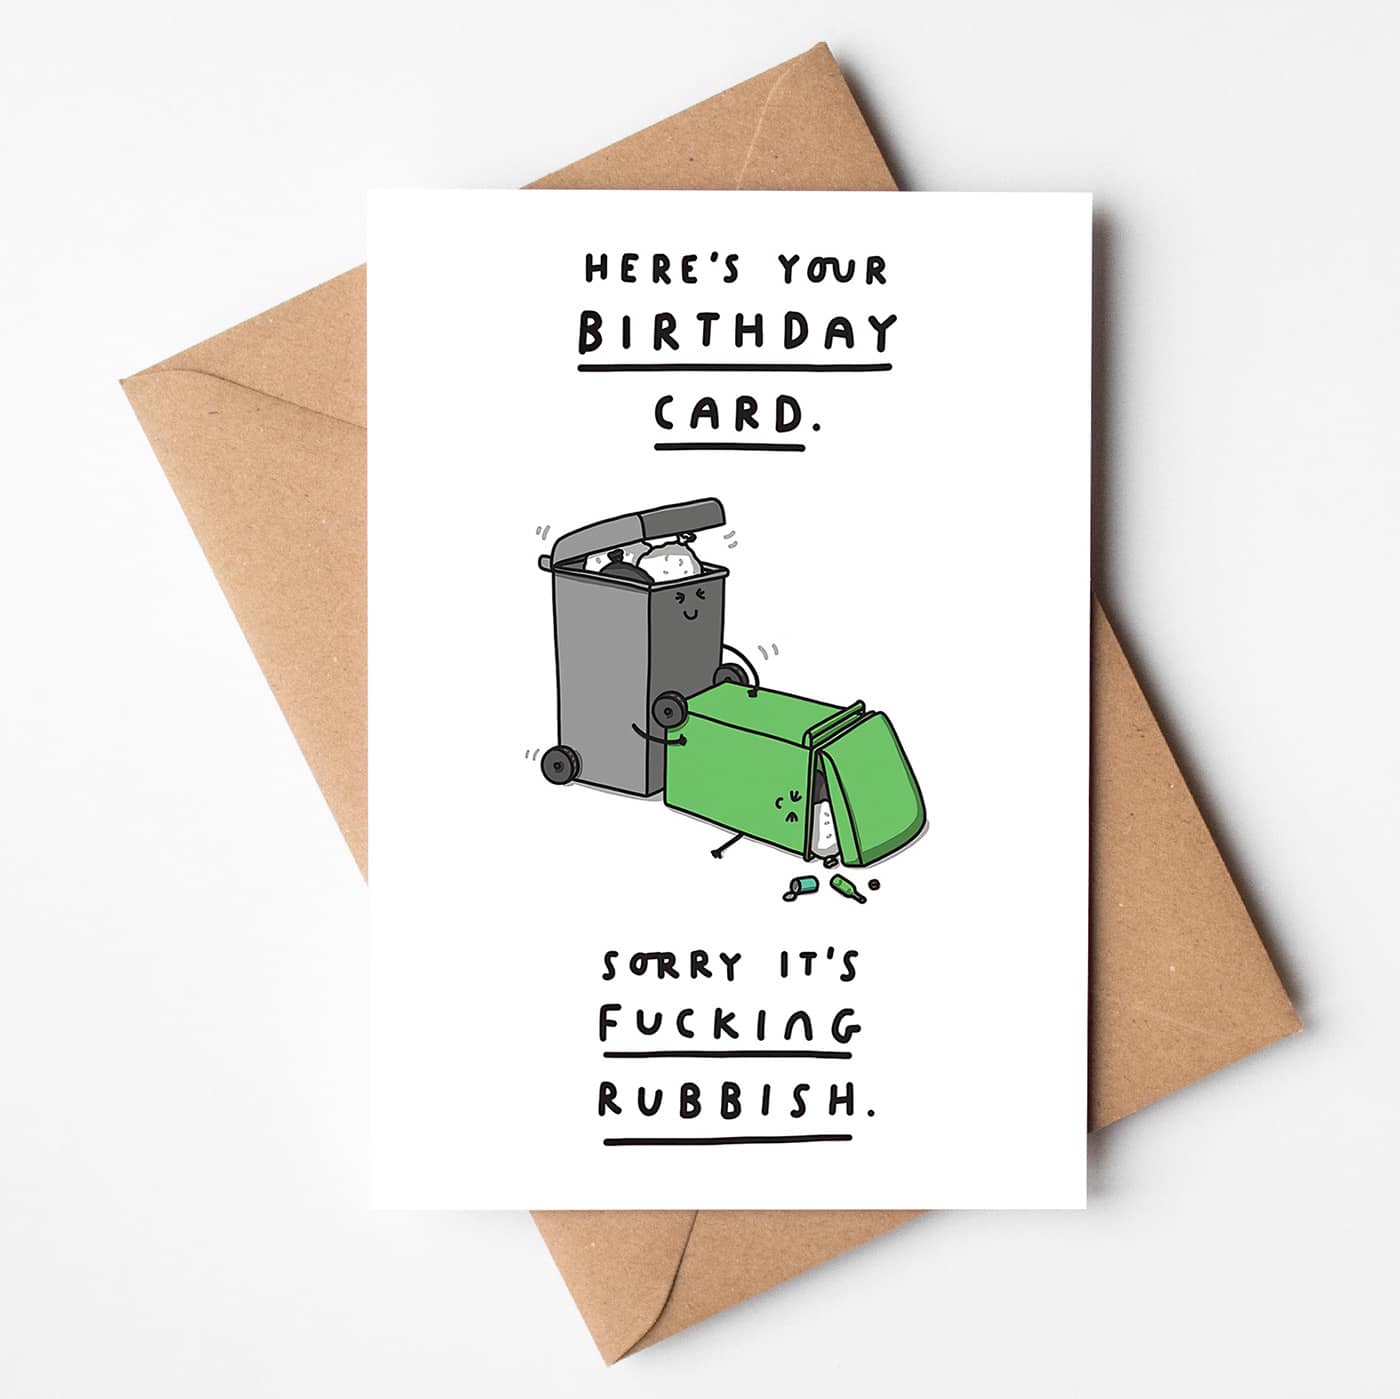 A funny birthday card for adults